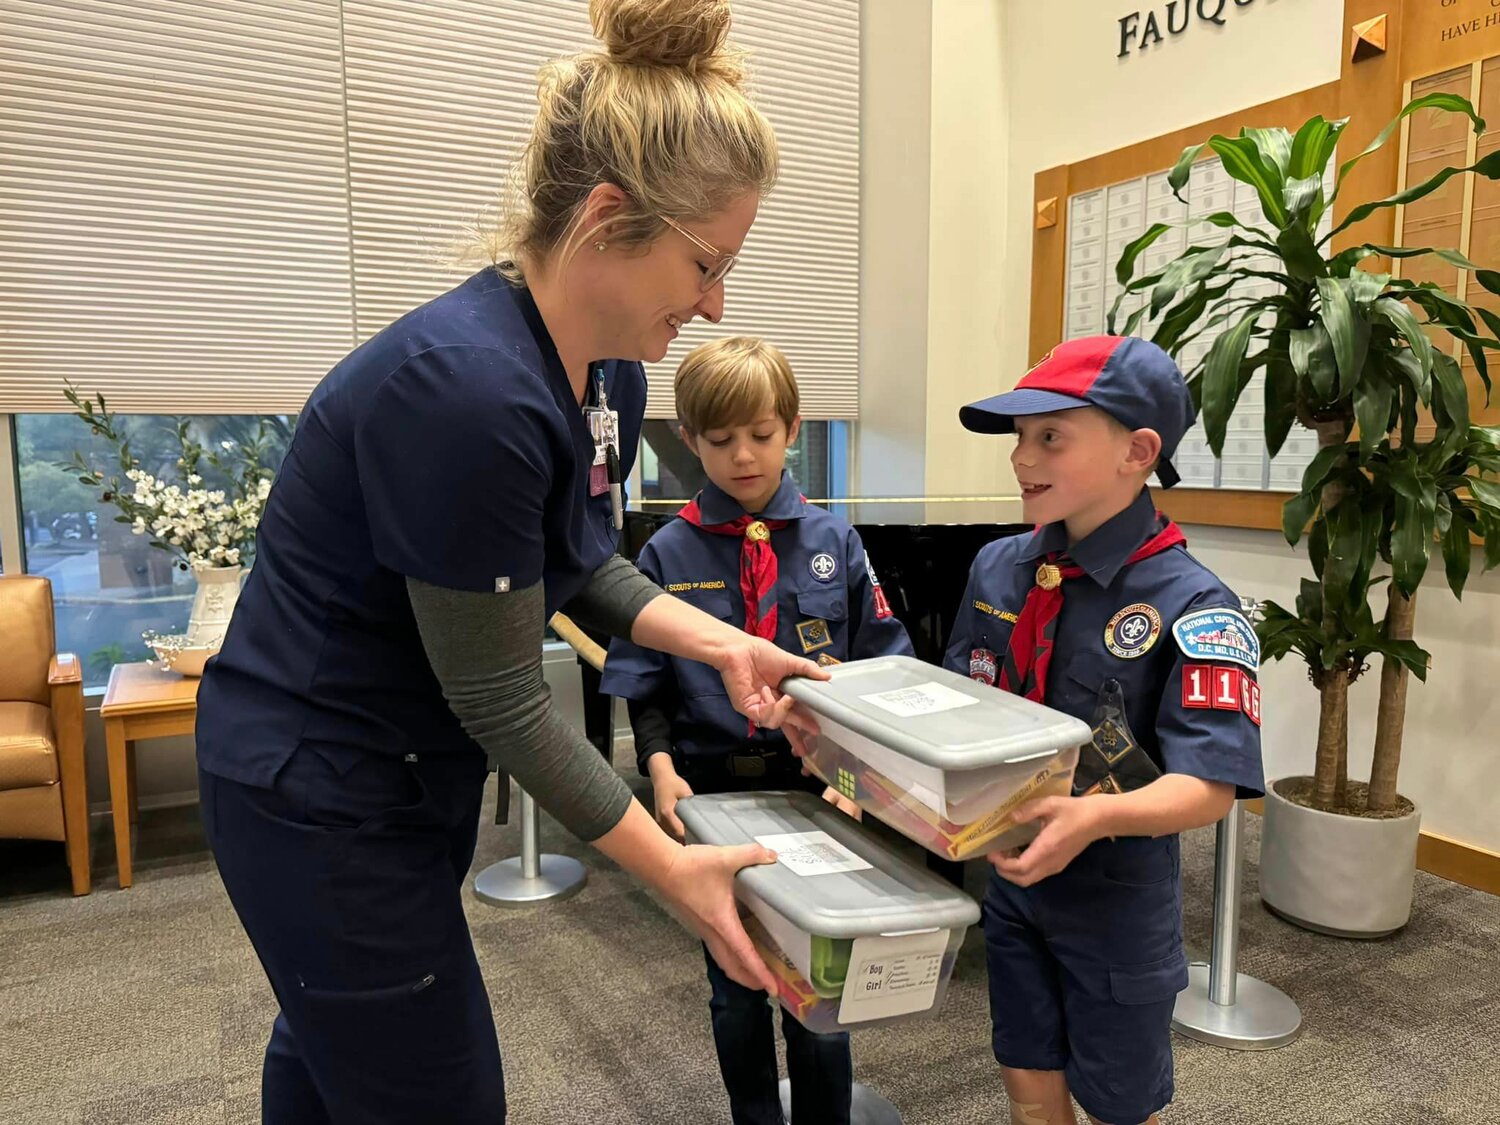 Cub Scouts hand boxes over to a nurse at Fauquier Hospital.